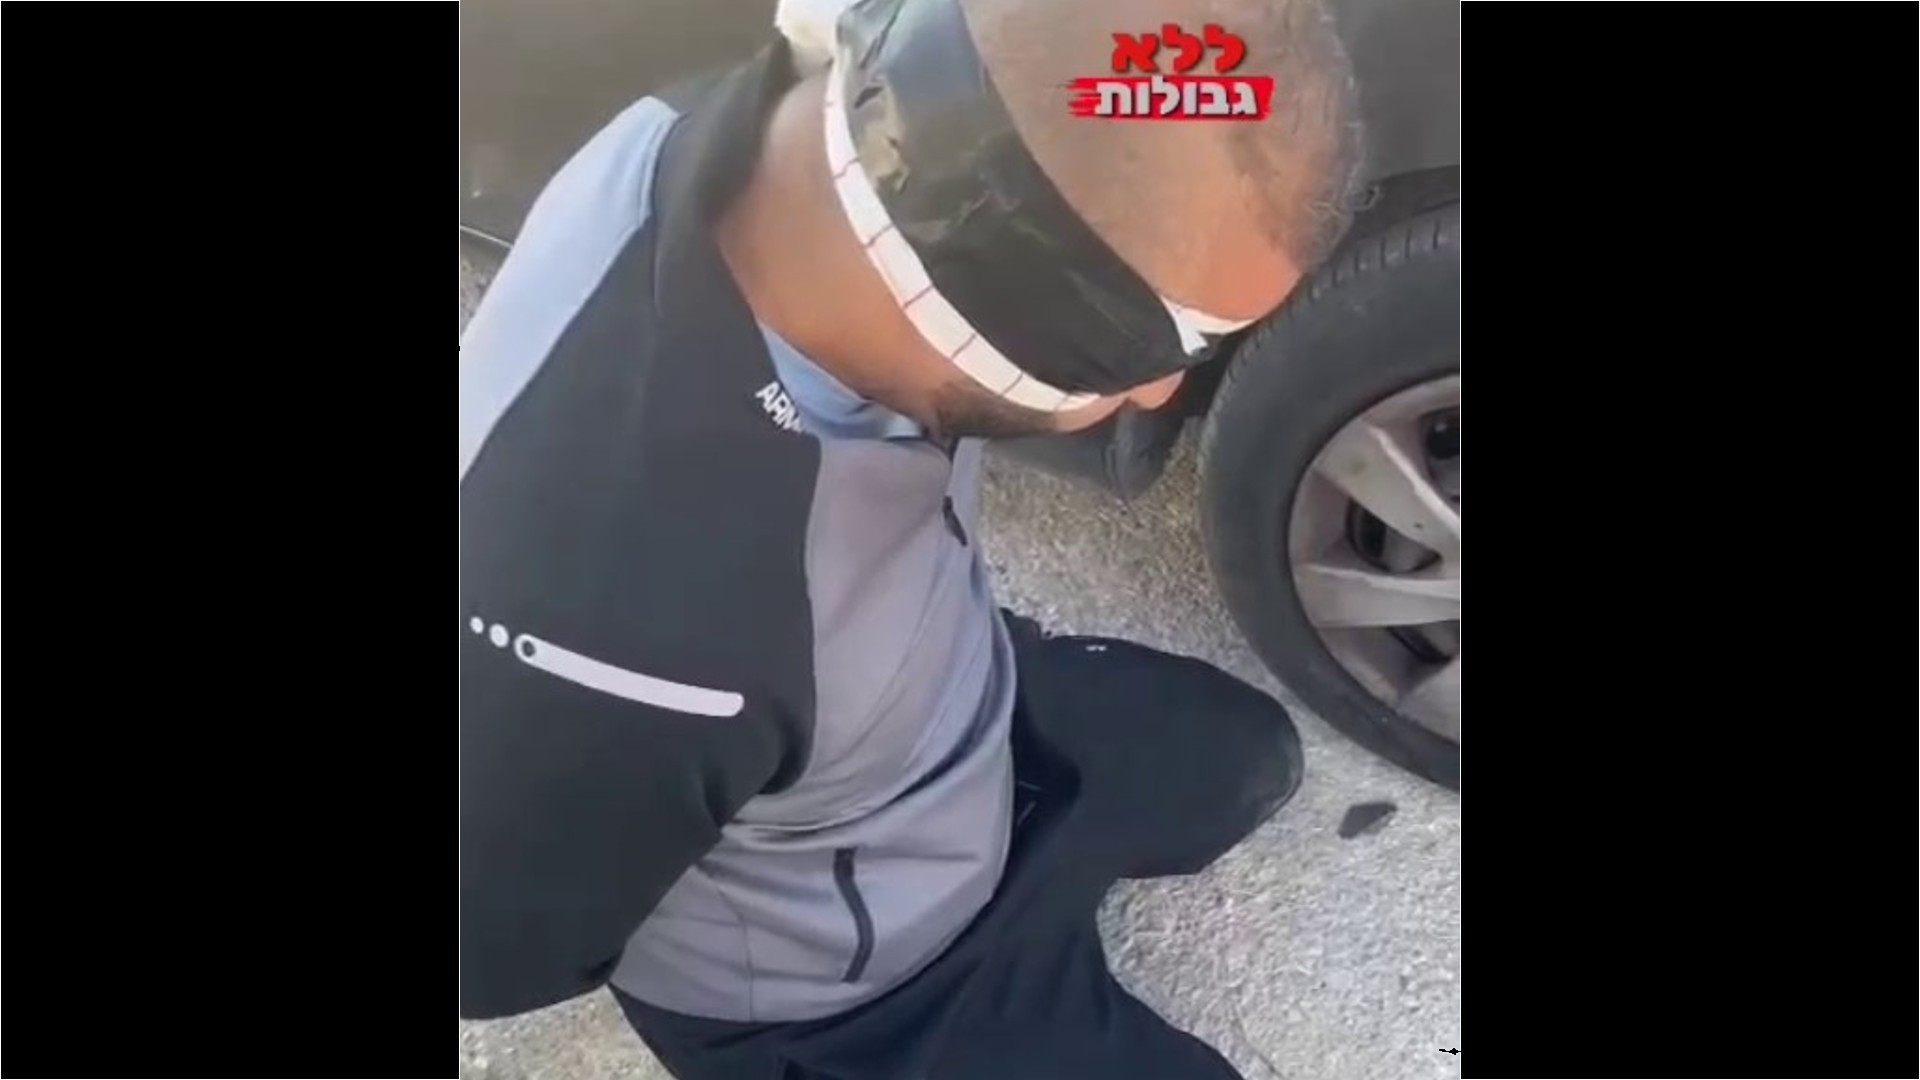 A video posted on a popular Israeli far-right Telegram channel shows a blindfolded and handcuffed man on his knees next to a car (Screengrab/Telegram)